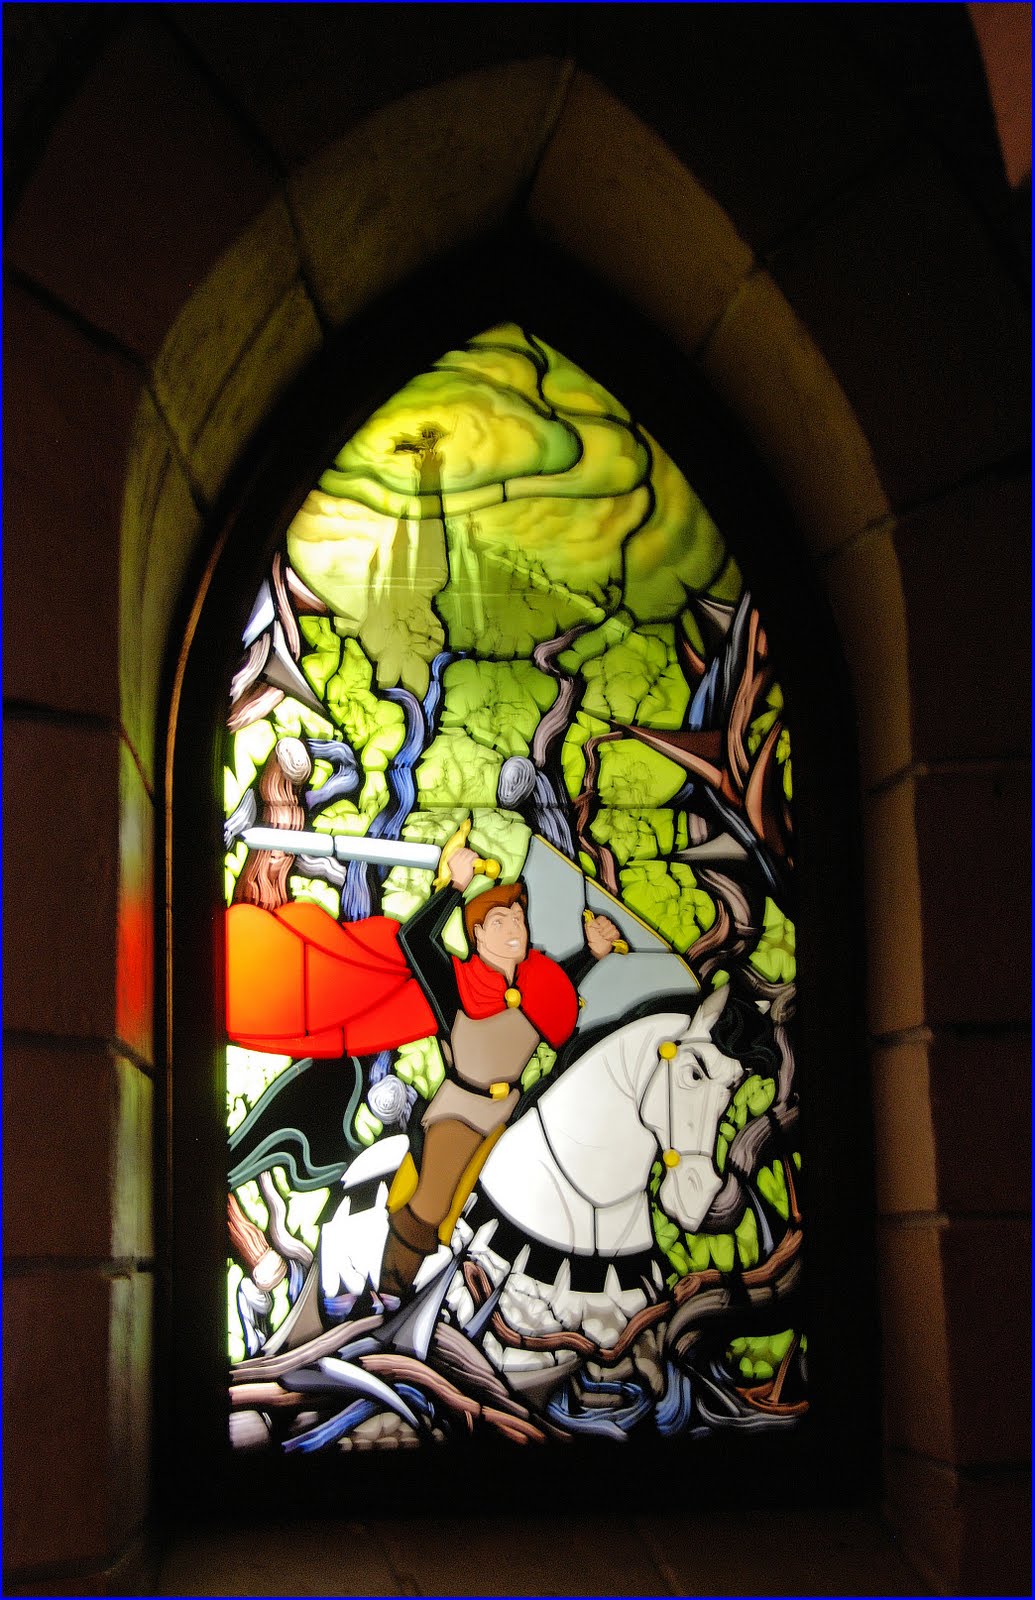 DF'82: Stained Glass Windows of Beauty